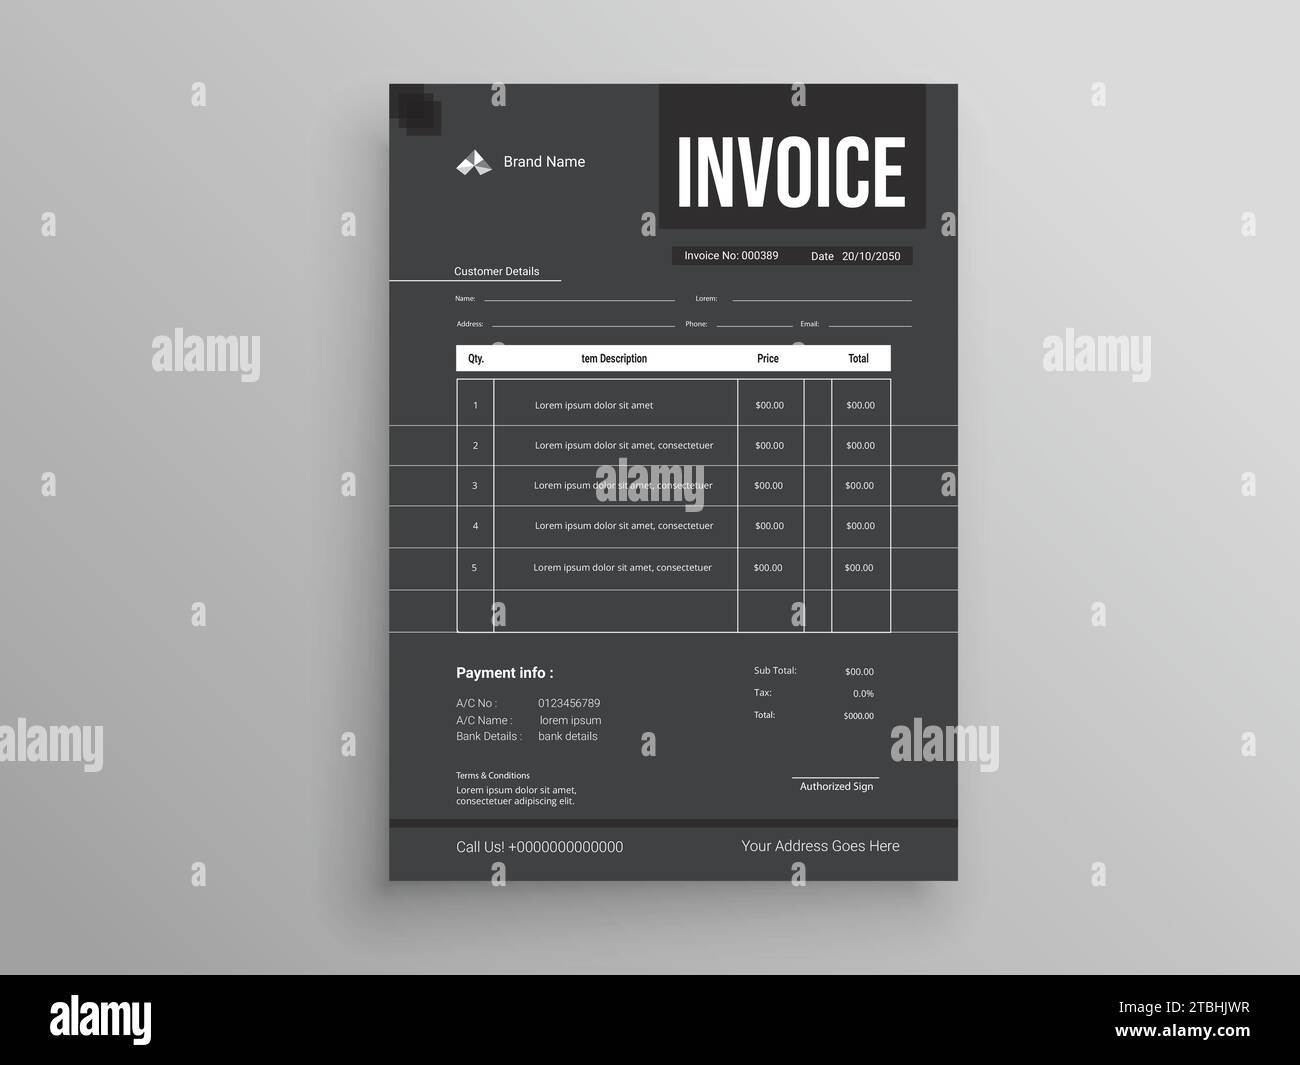 Invoice Design. Business invoice form template. Invoicing quotes, money bills or pricelist and payment agreement design templates. Tax form design Stock Vector